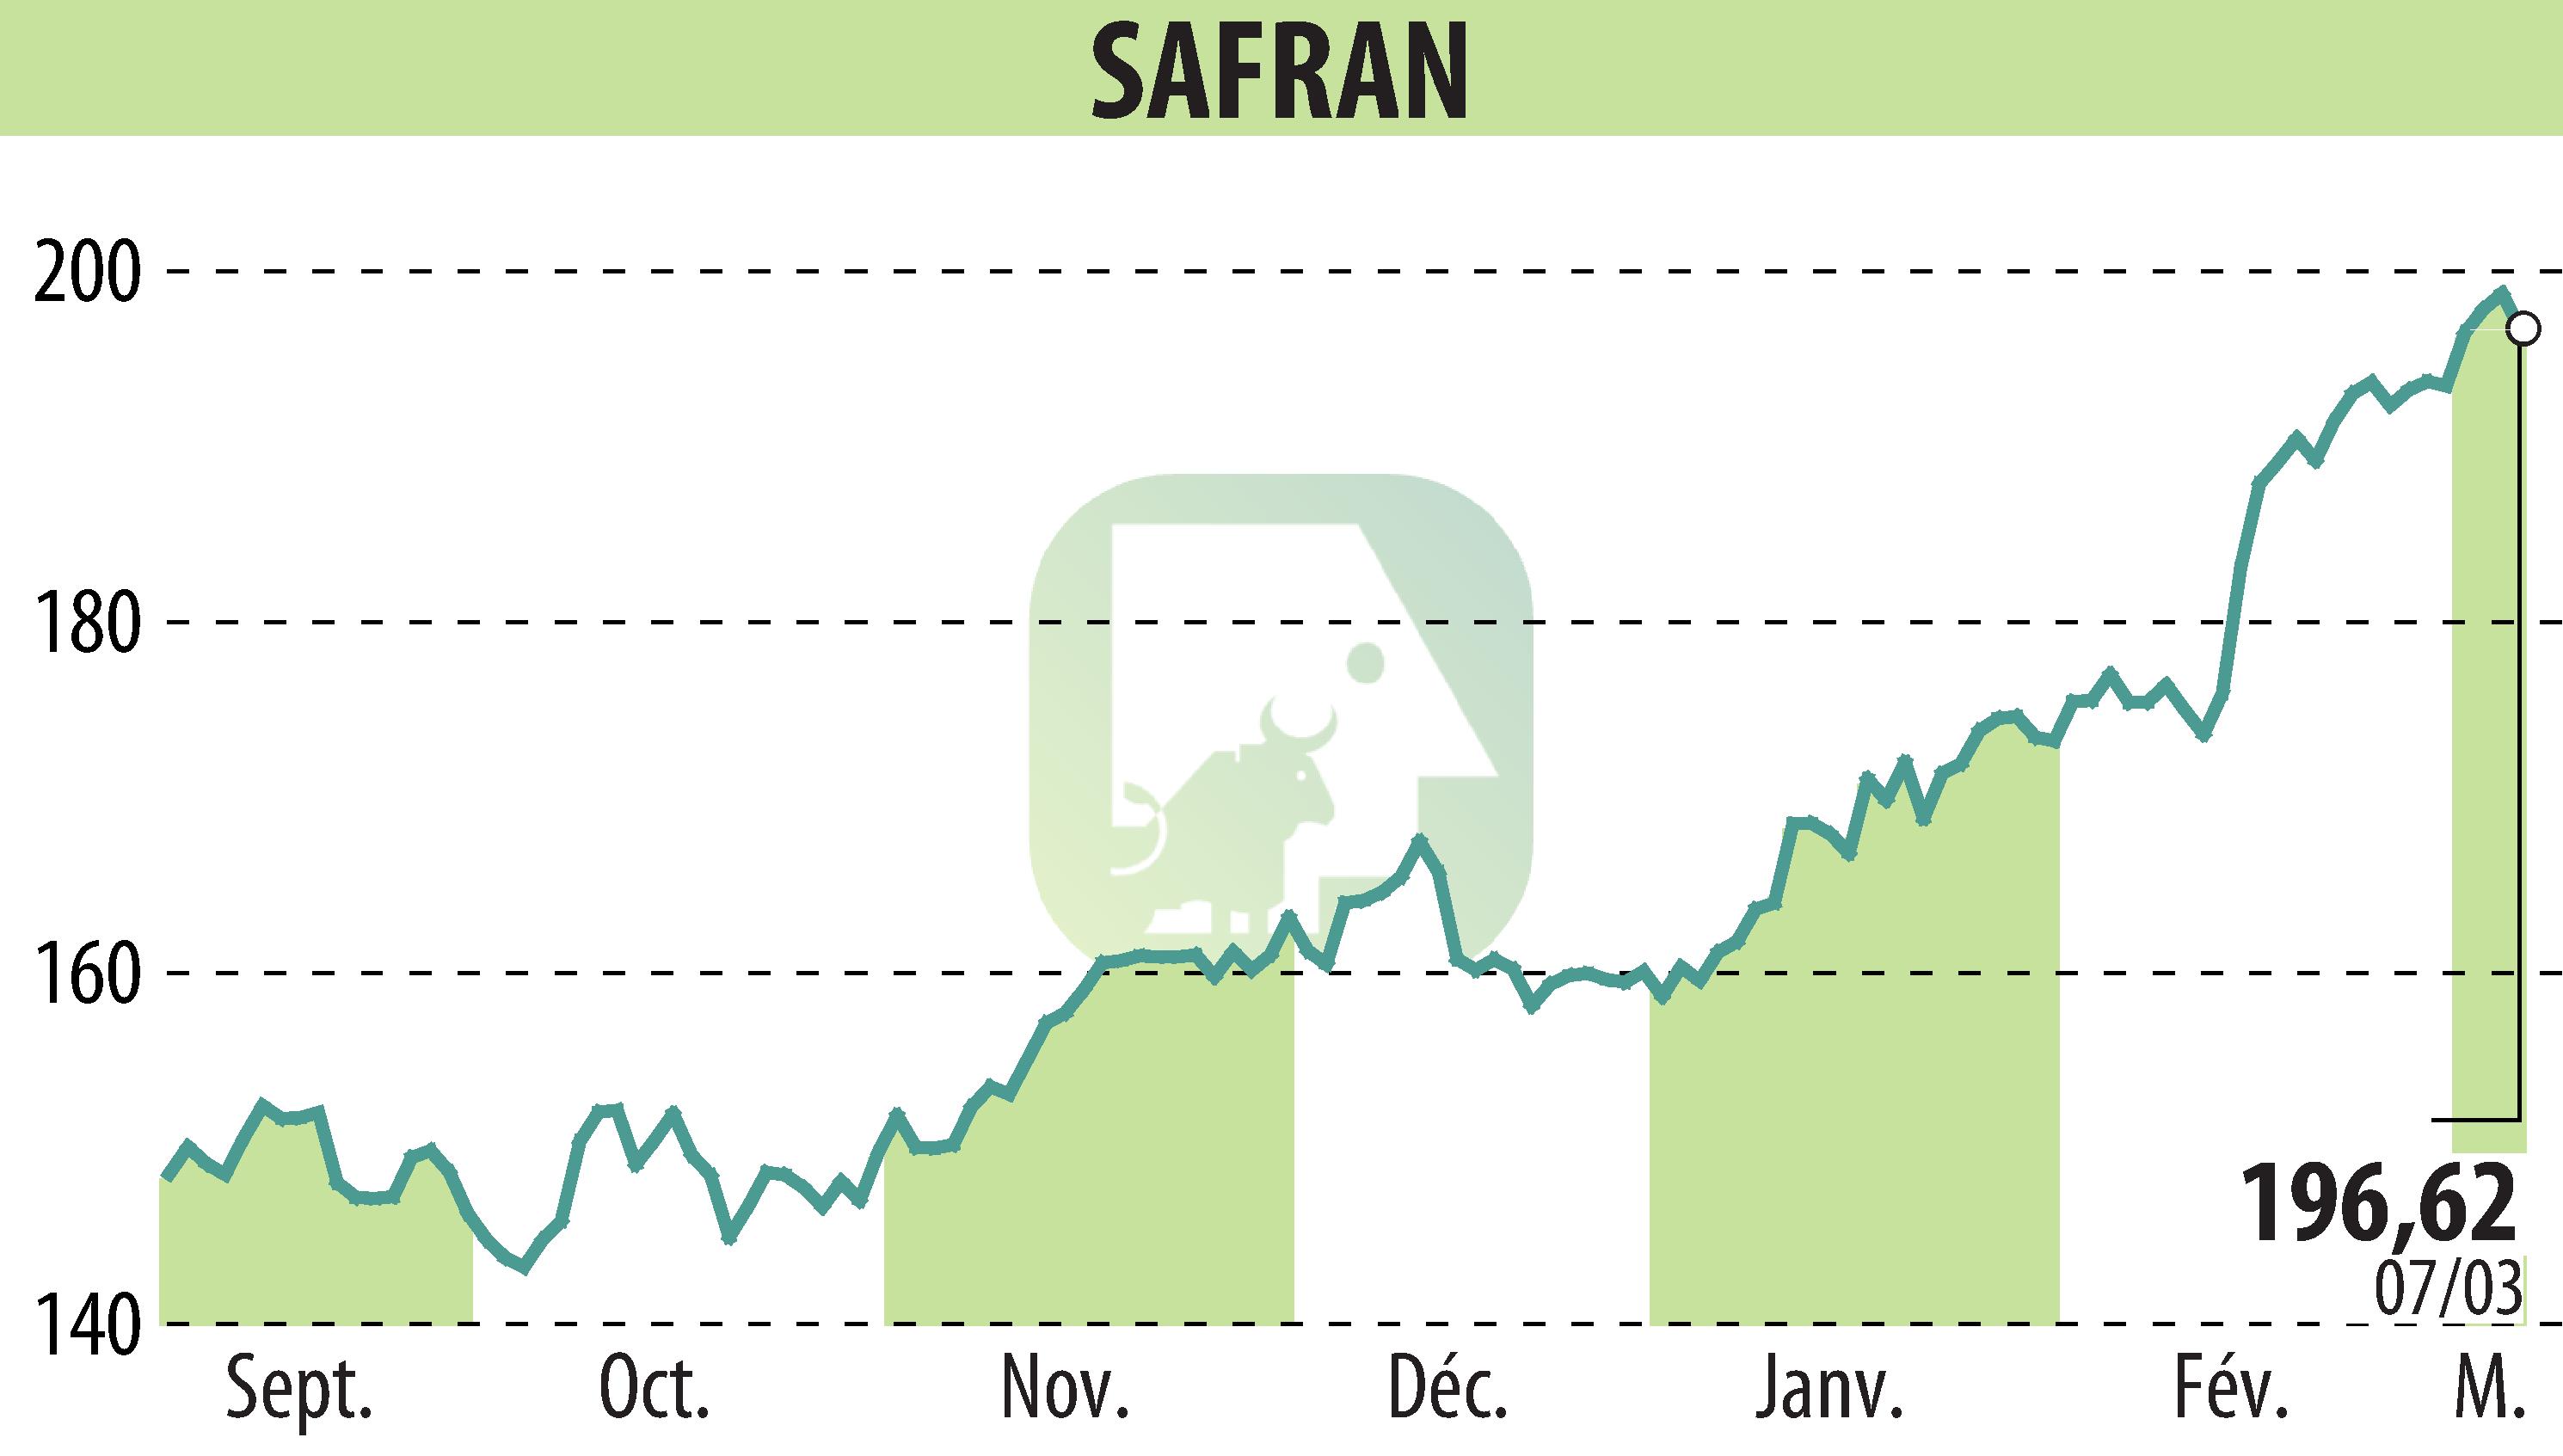 Stock price chart of SAFRAN (EPA:SAF) showing fluctuations.